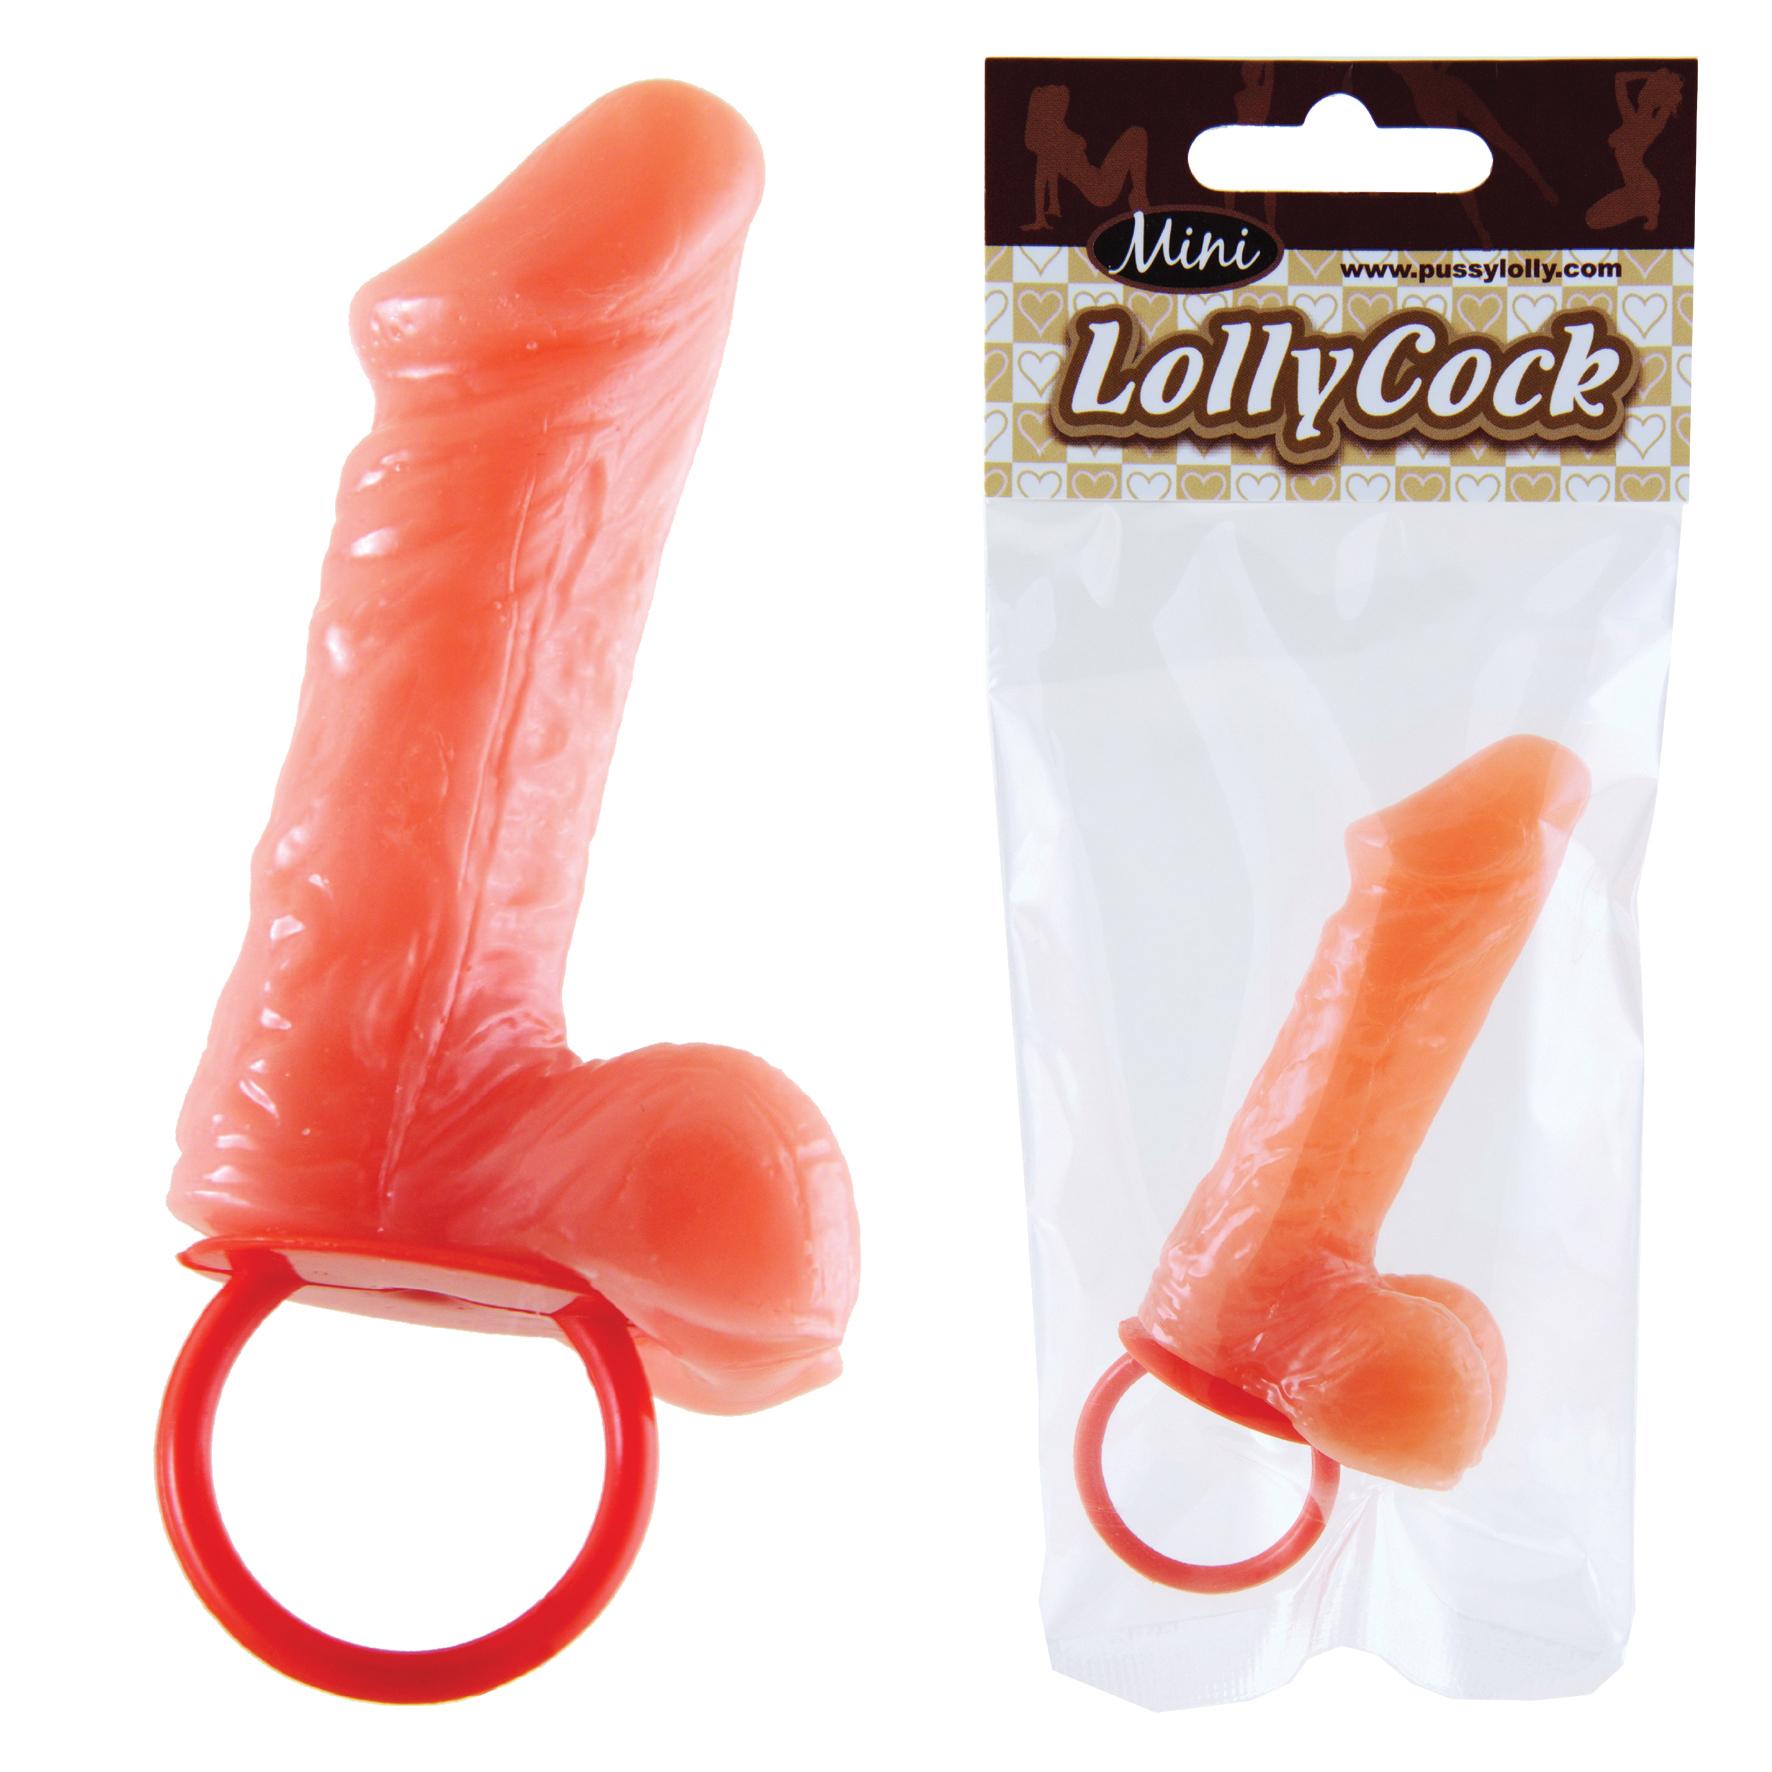 "Penis-Lolly"